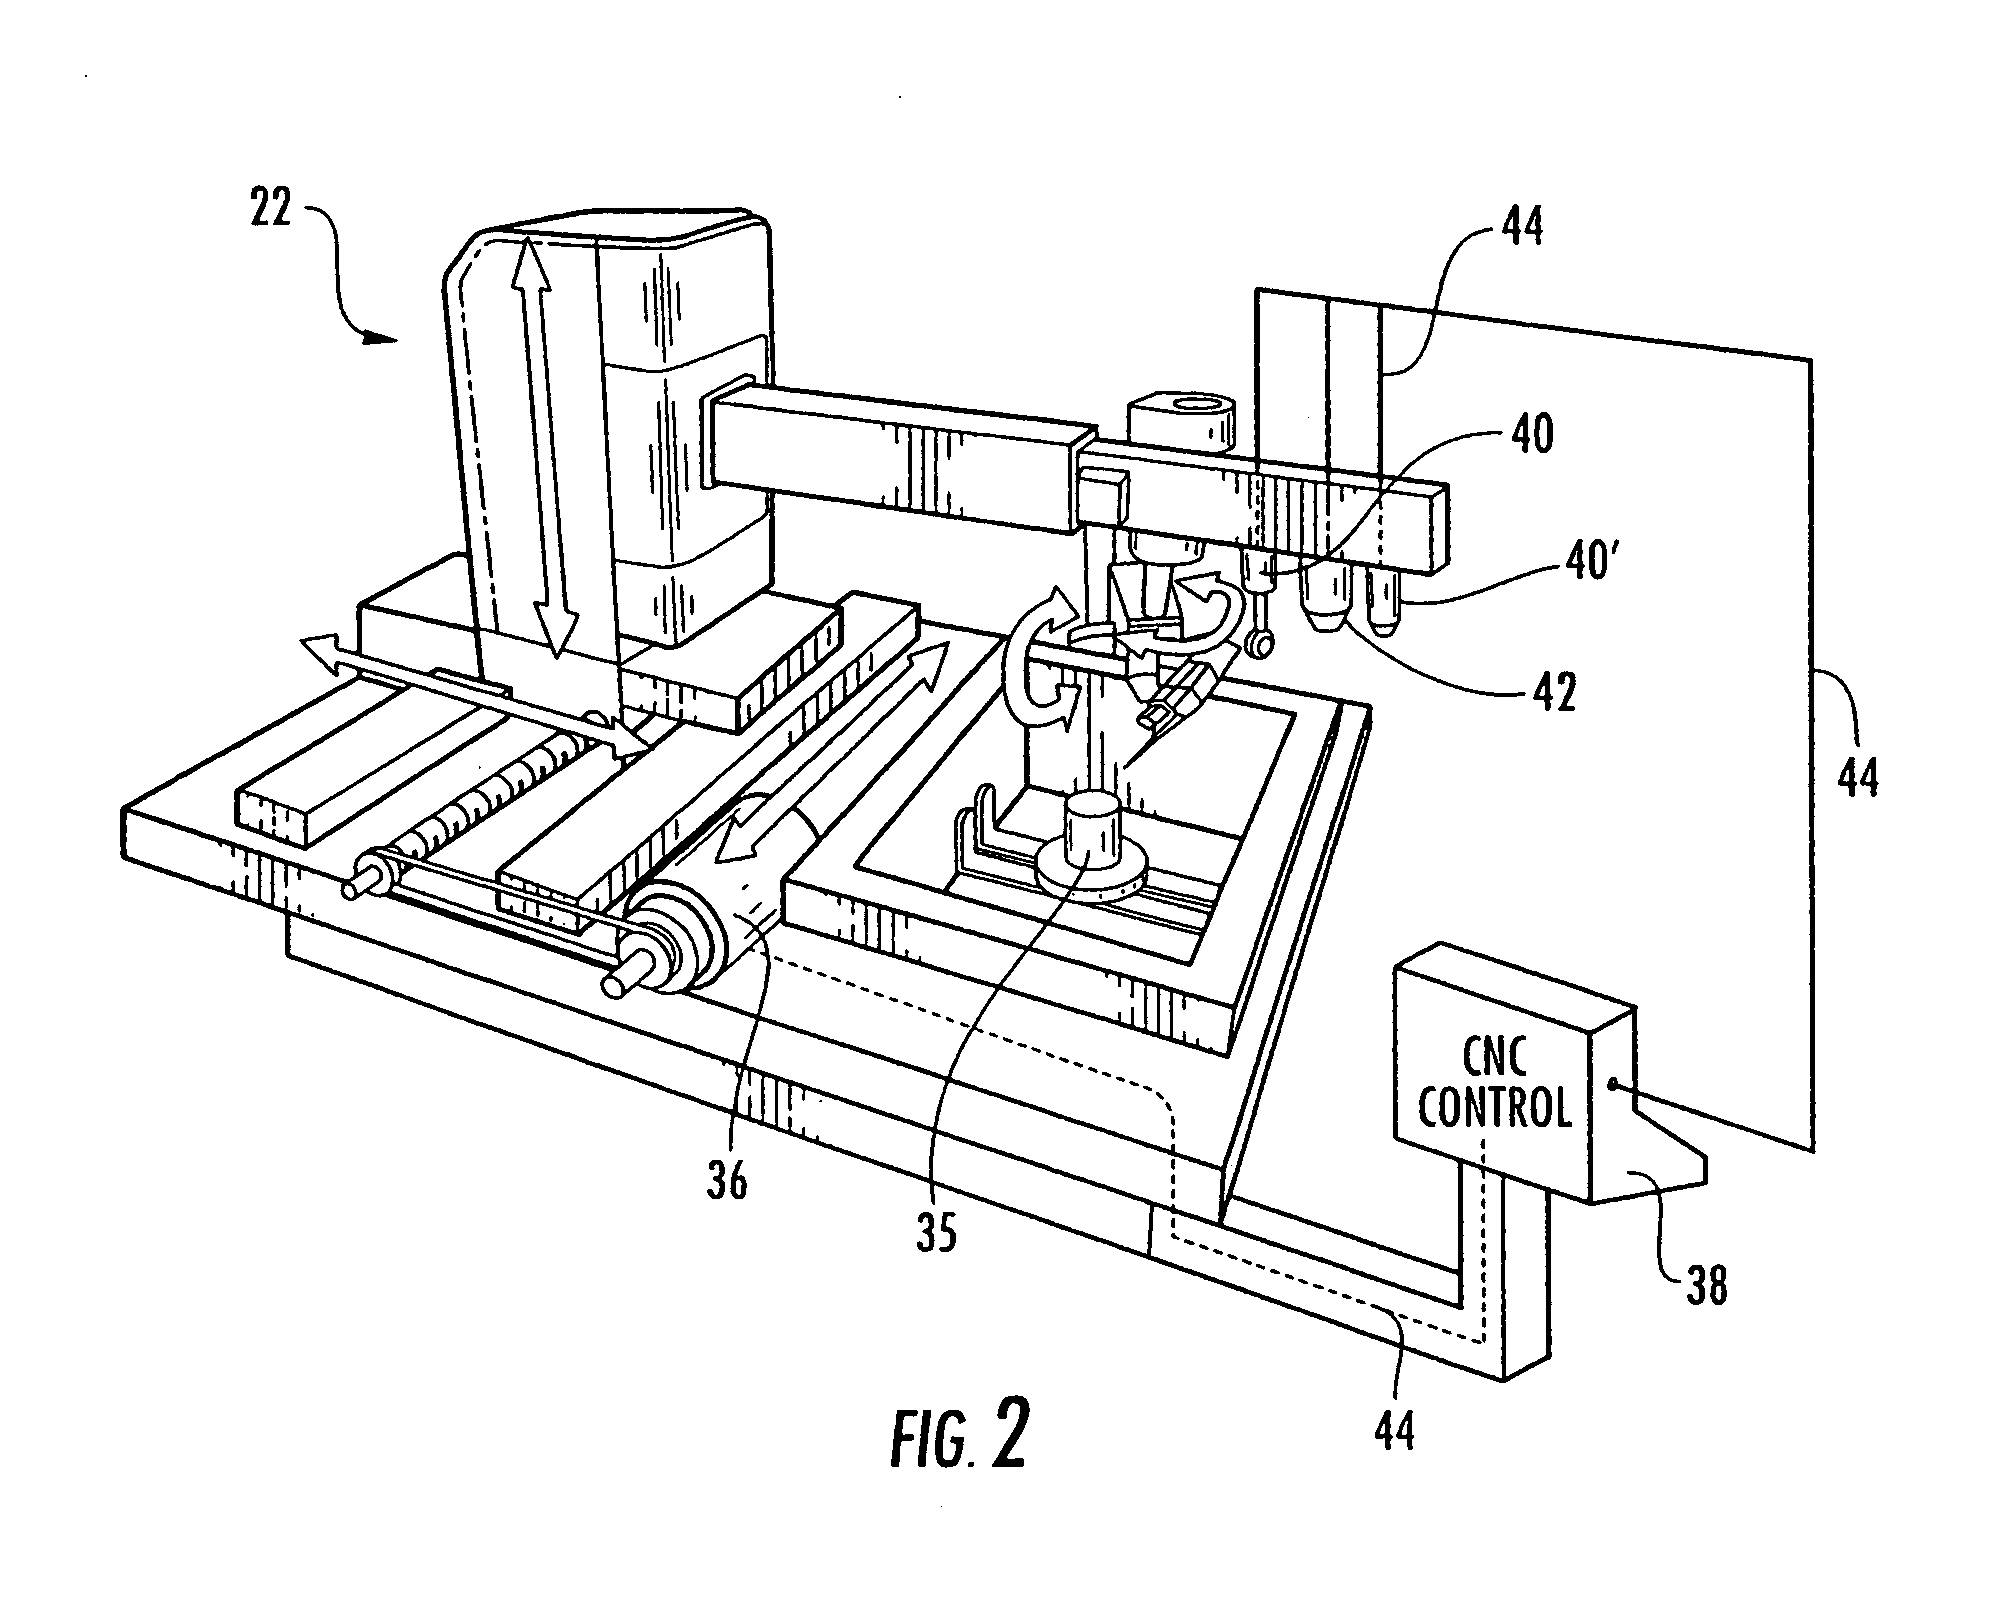 Method and apparatus for removing coatings from a substrate using multiple sequential steps